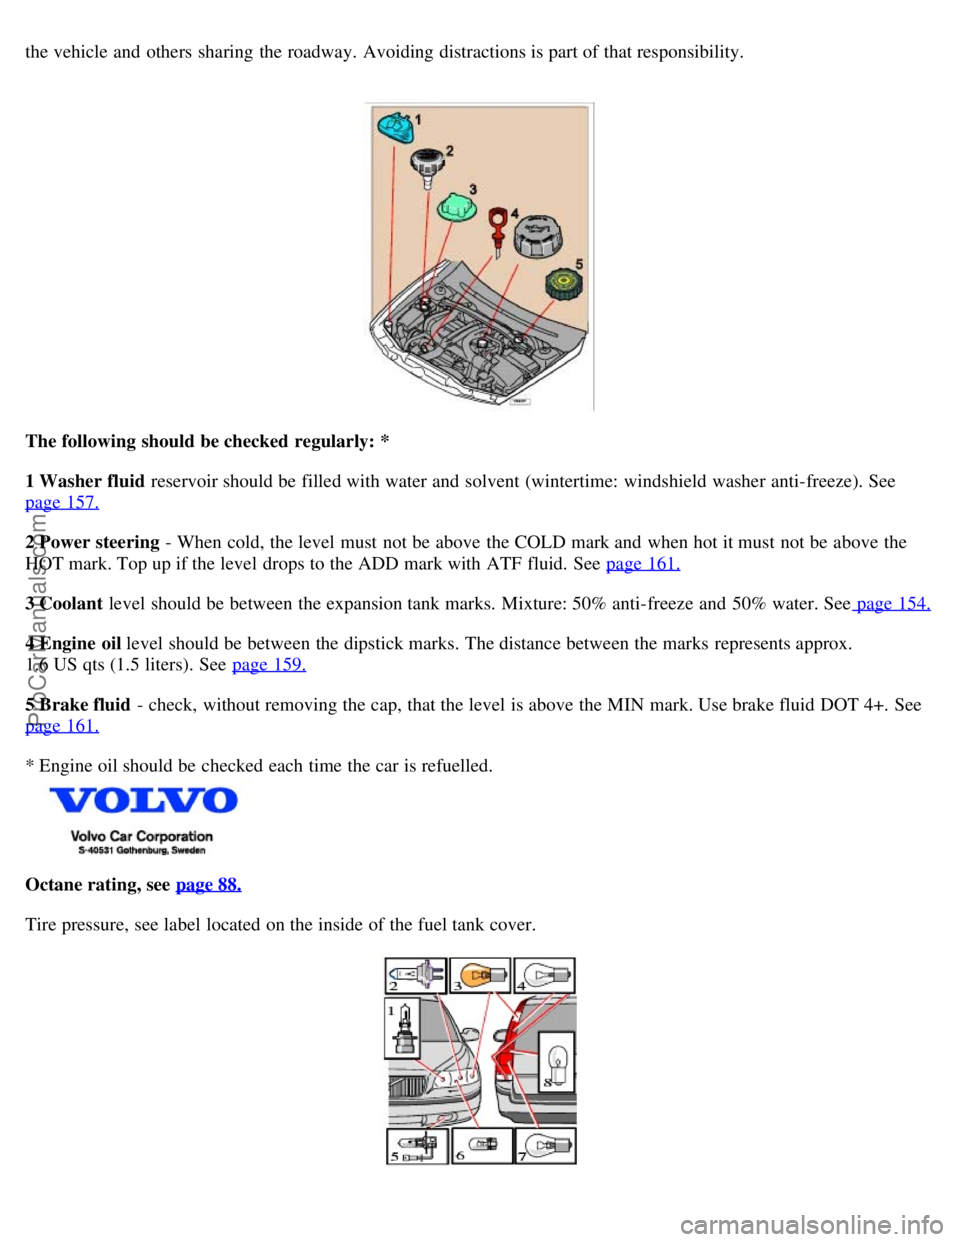 VOLVO V70 2006  Owners Manual the vehicle and  others  sharing  the roadway.  Avoiding distractions is part of that responsibility.  
The following  should be checked  regularly: *
1 Washer fluid  reservoir should be  filled with 